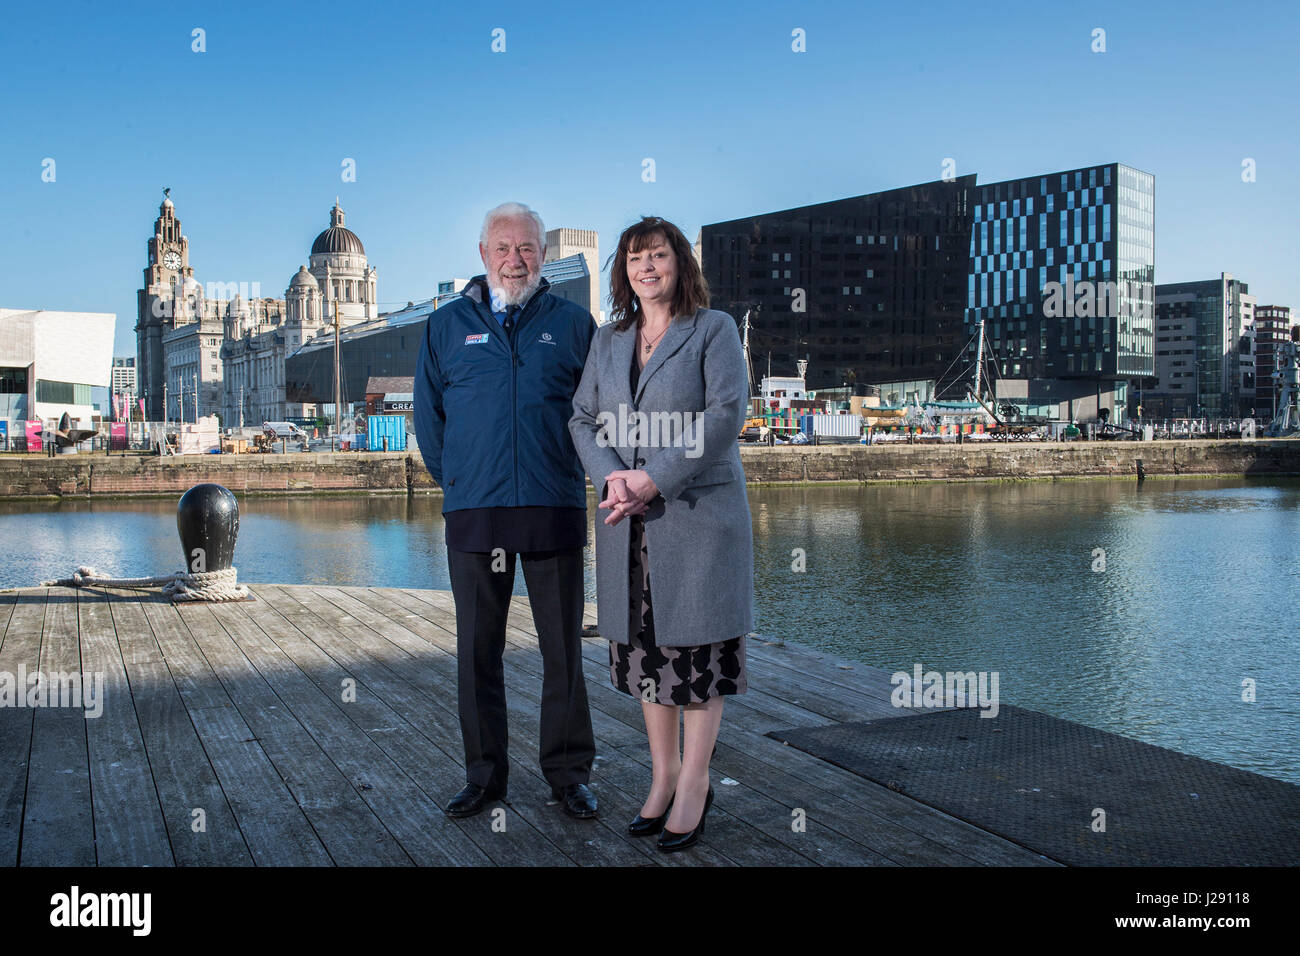 Sir Robin Knox-Johnston, founder of the Clipper Race, (left) and deputy Mayor of Liverpool Ann O'Byrne pose in Albert Dock as they announce the return of the Clipper Round The World Yacht Race to Liverpool. Stock Photo